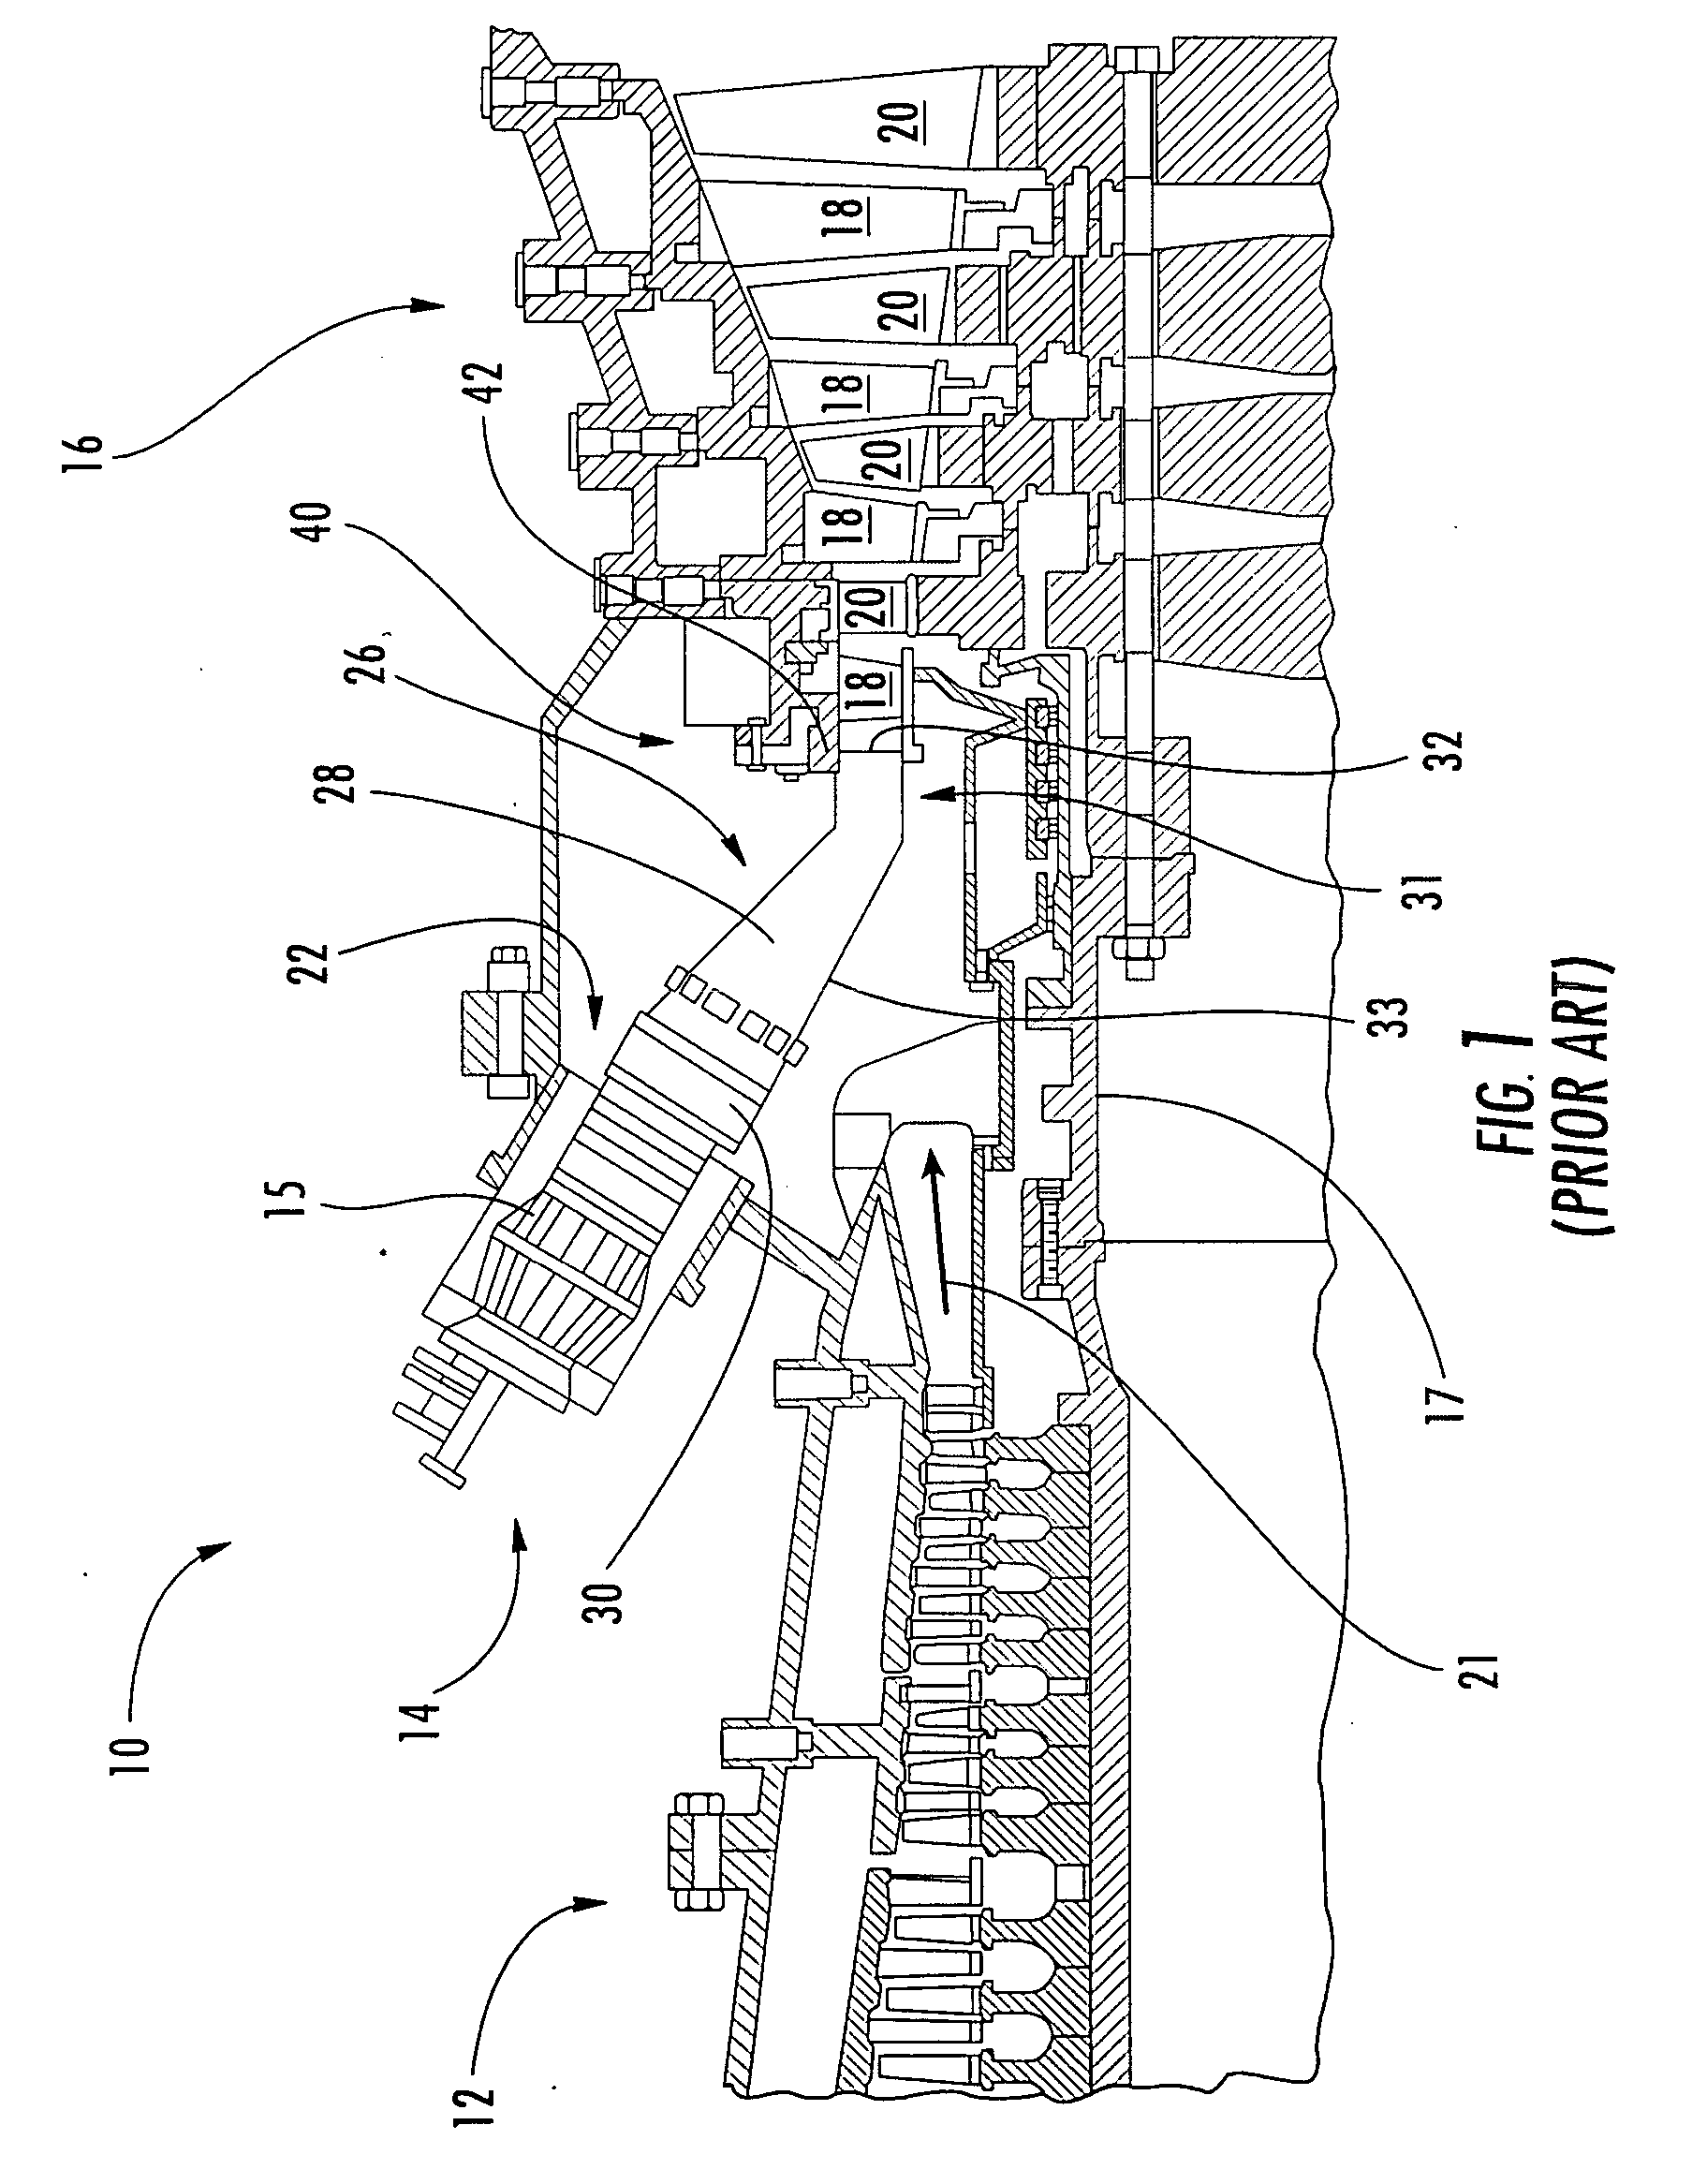 Support system for transition ducts